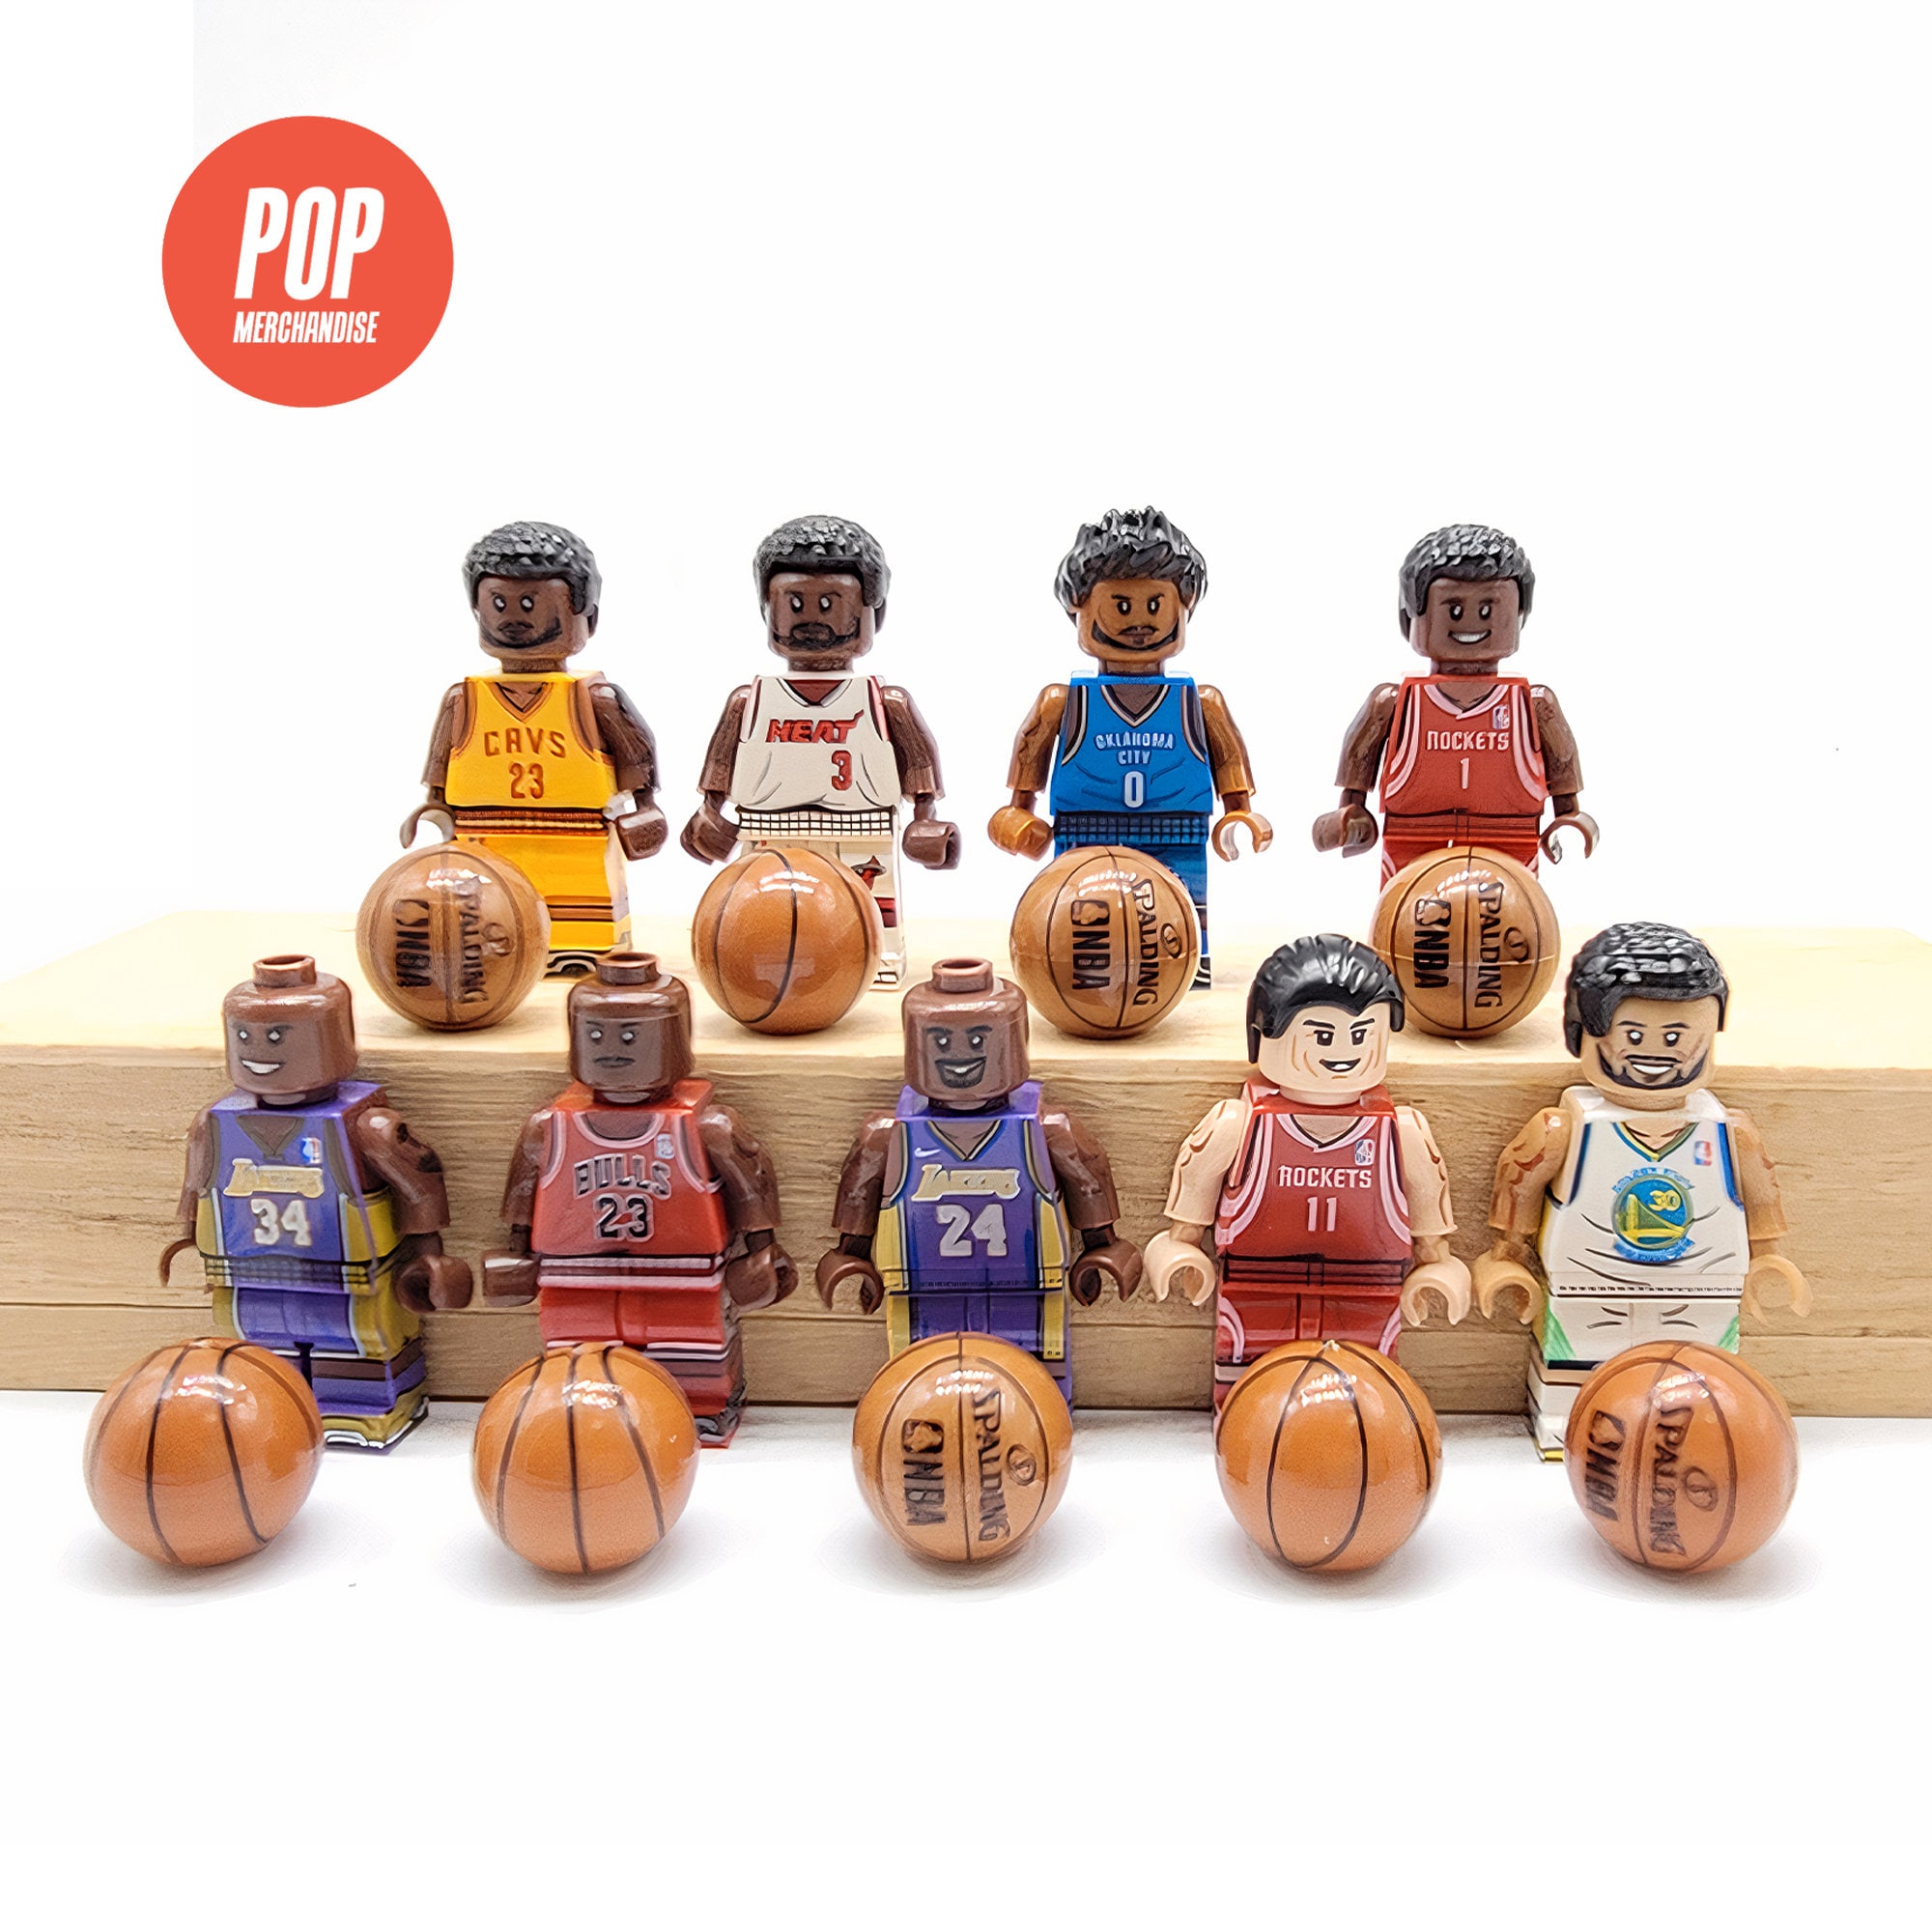 Pop Sports NBA Basketball 3.75 Inch Action Figure Exclusive - Stephen